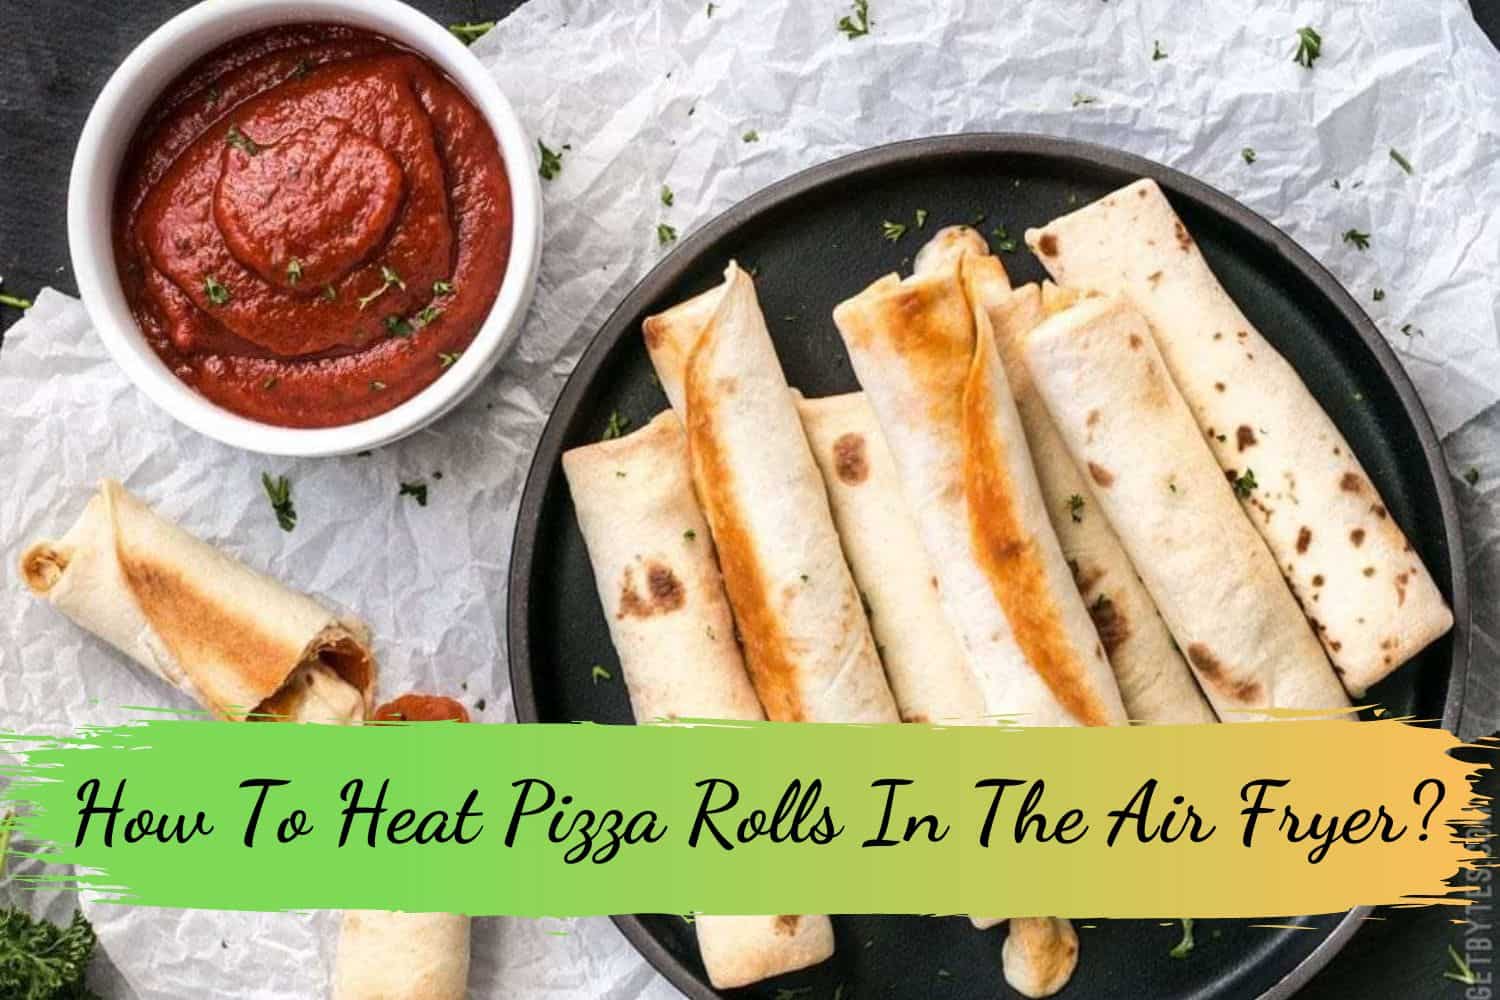 How To Heat Pizza Rolls In The Air Fryer